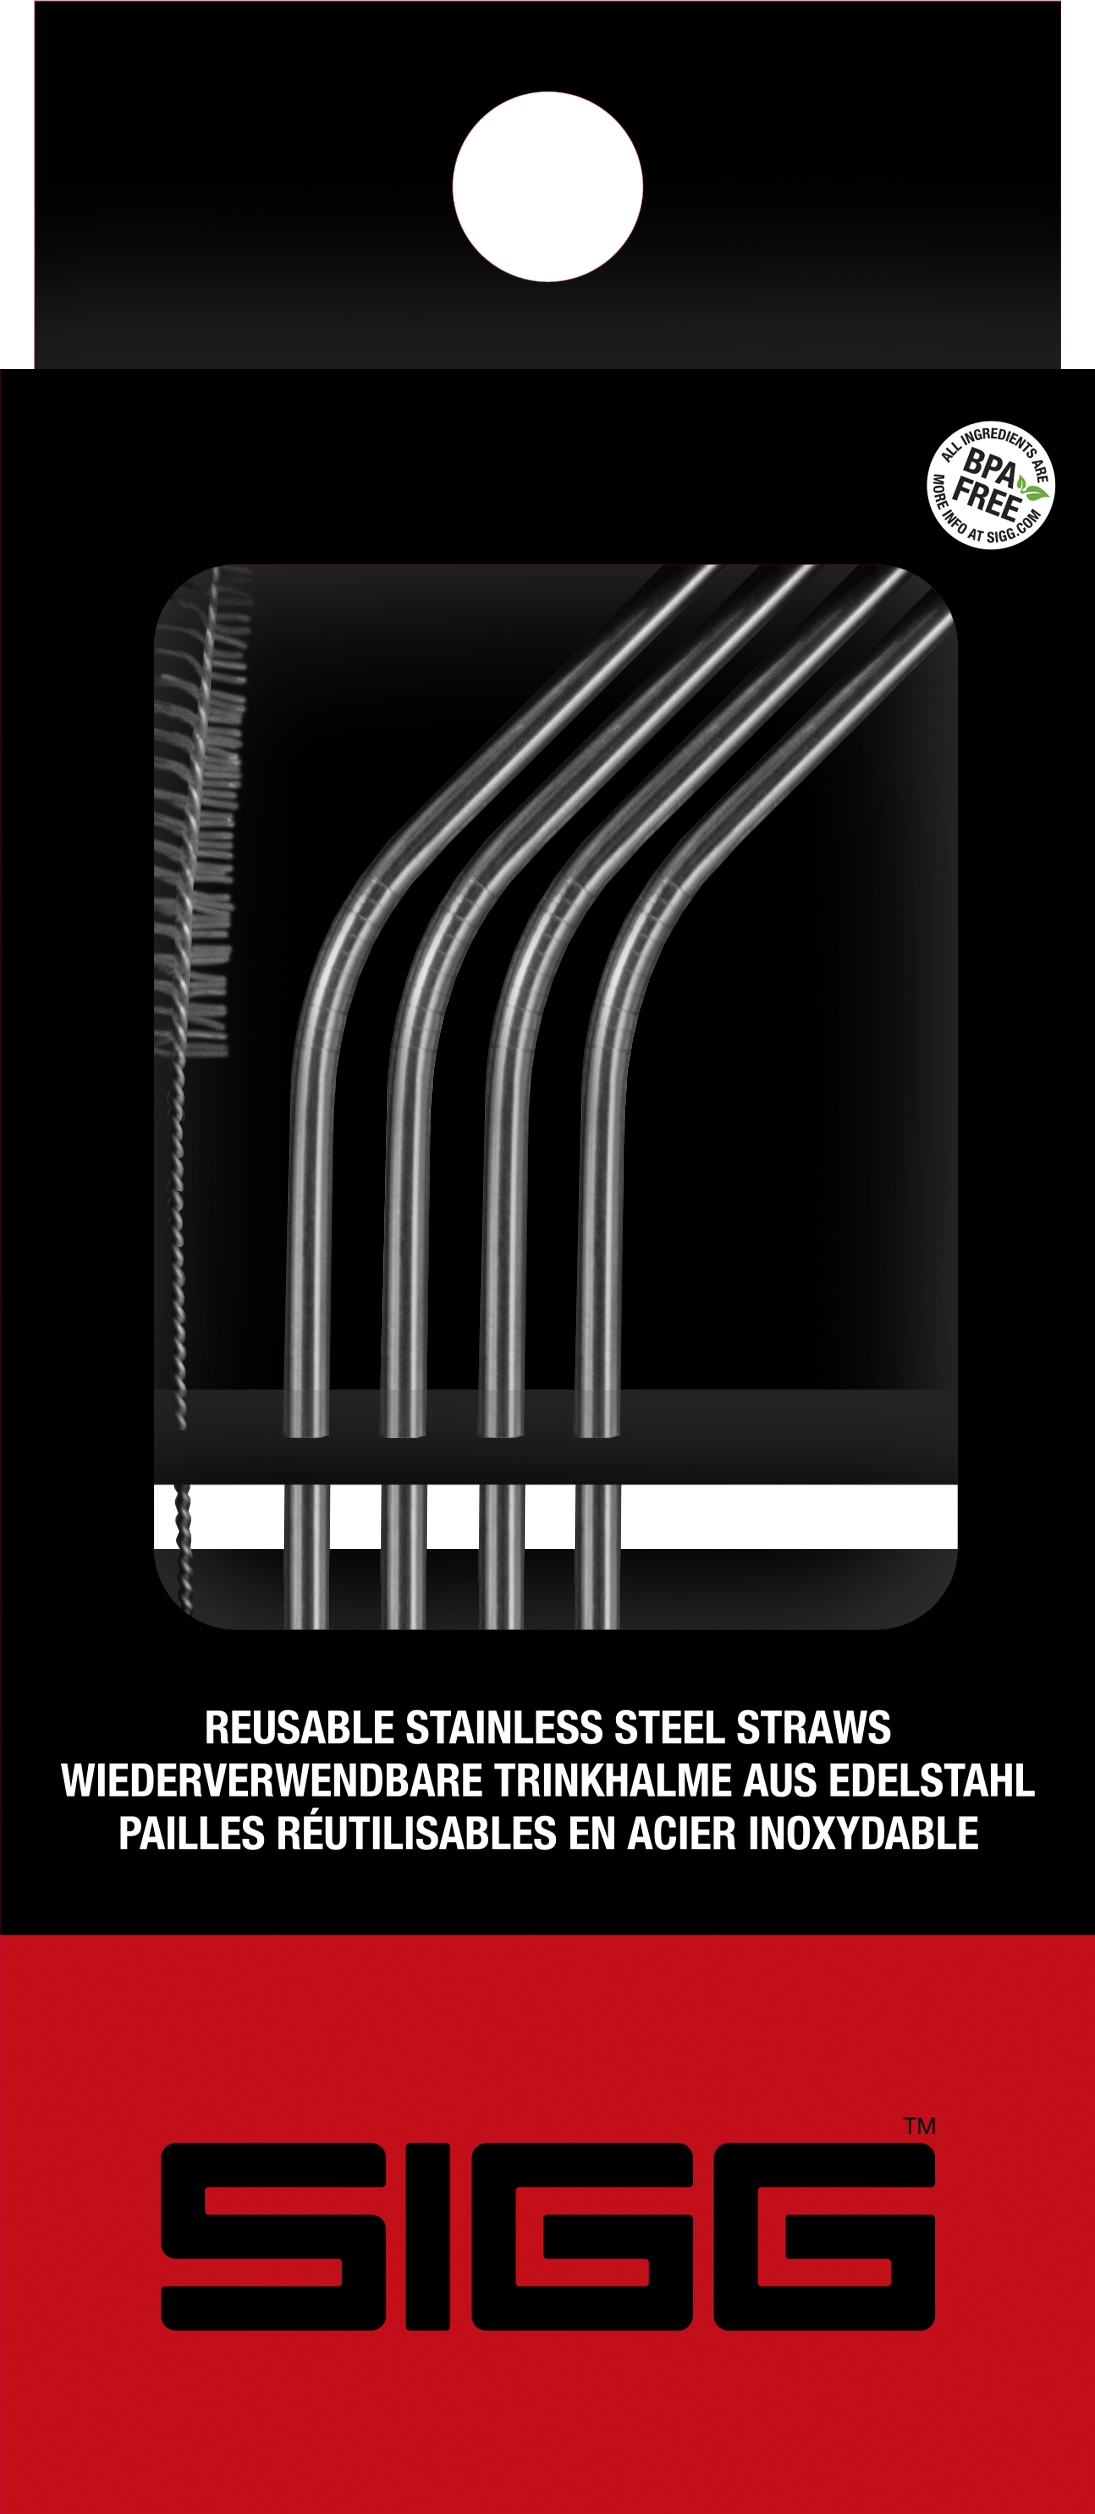 Sigg Stainless Steel Straw Set - Pailles